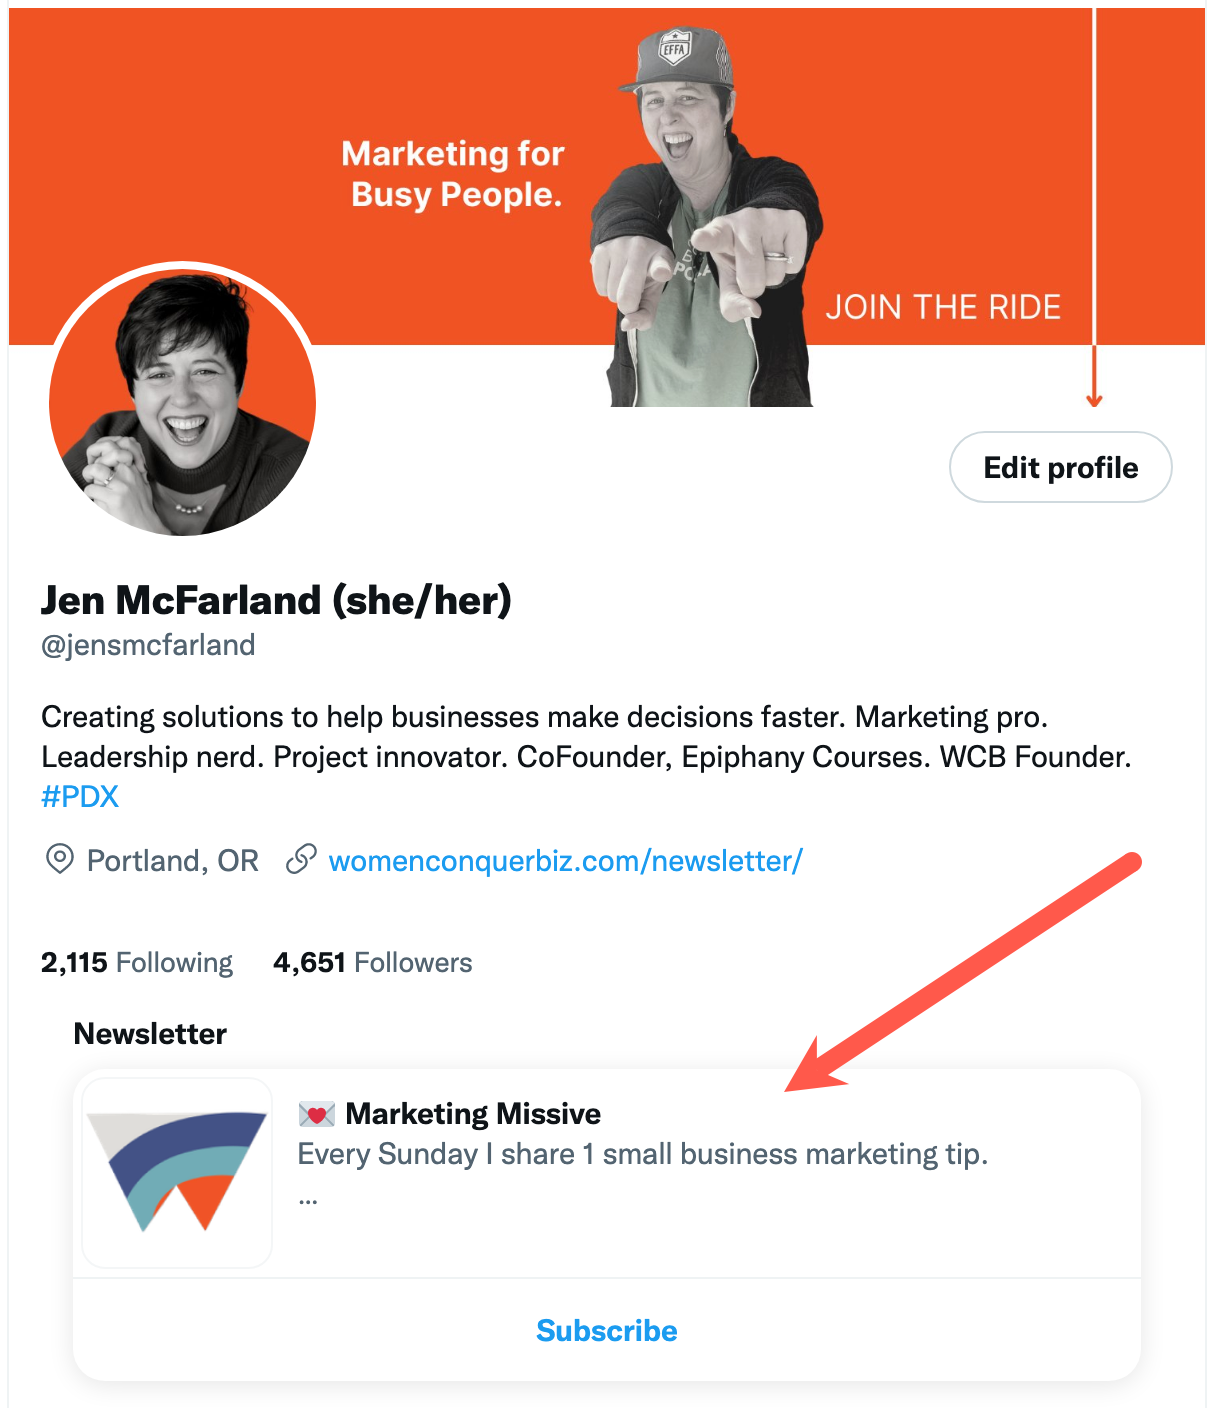 The Marketing Missive newsletter subscription activated on my Jen McFarland Twitter profile.